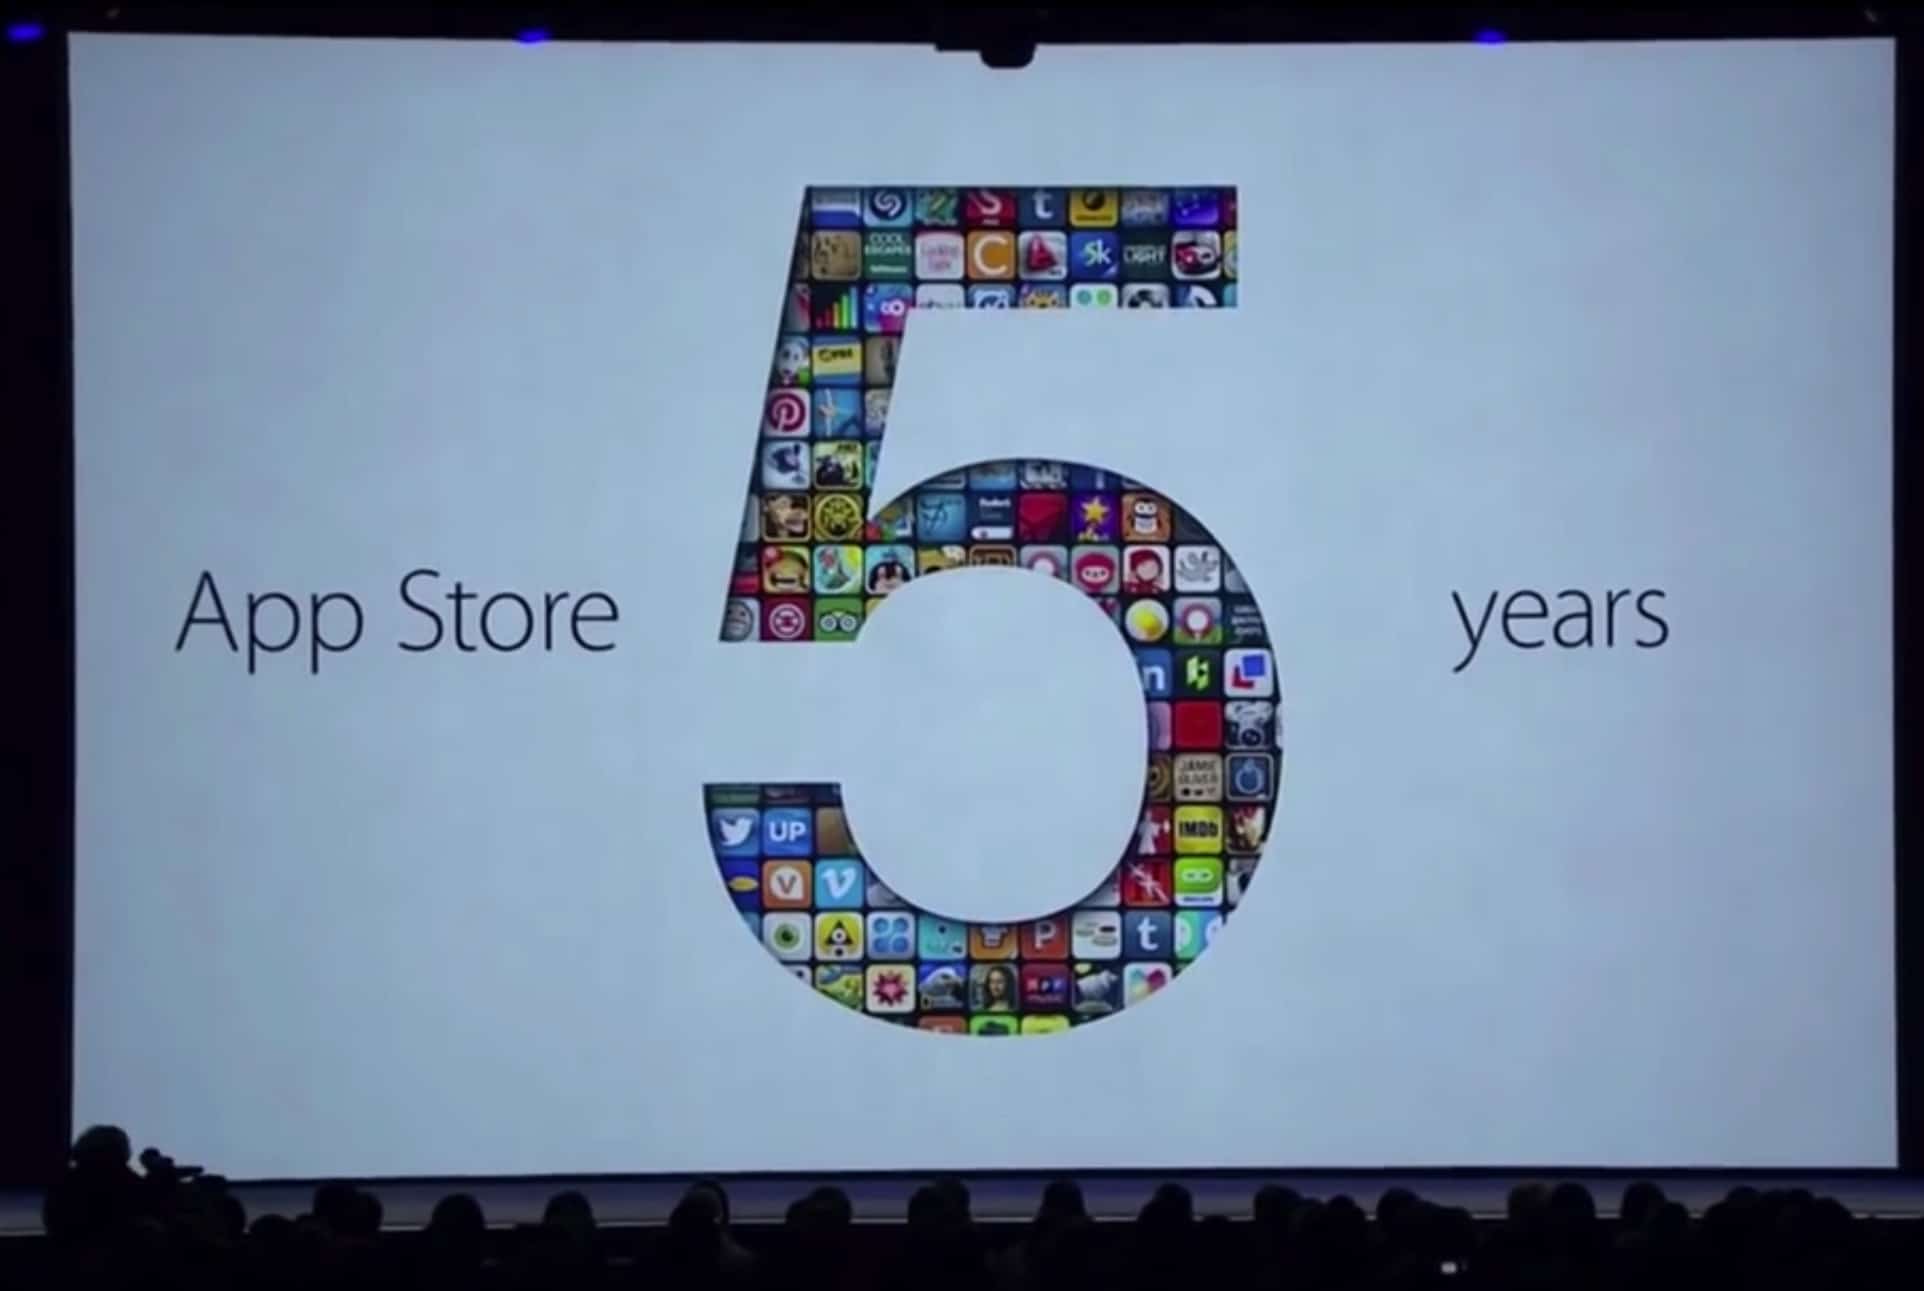 In its first five years, the App Store becomes an unstoppable money machine, paying out $10 billion to app developers.